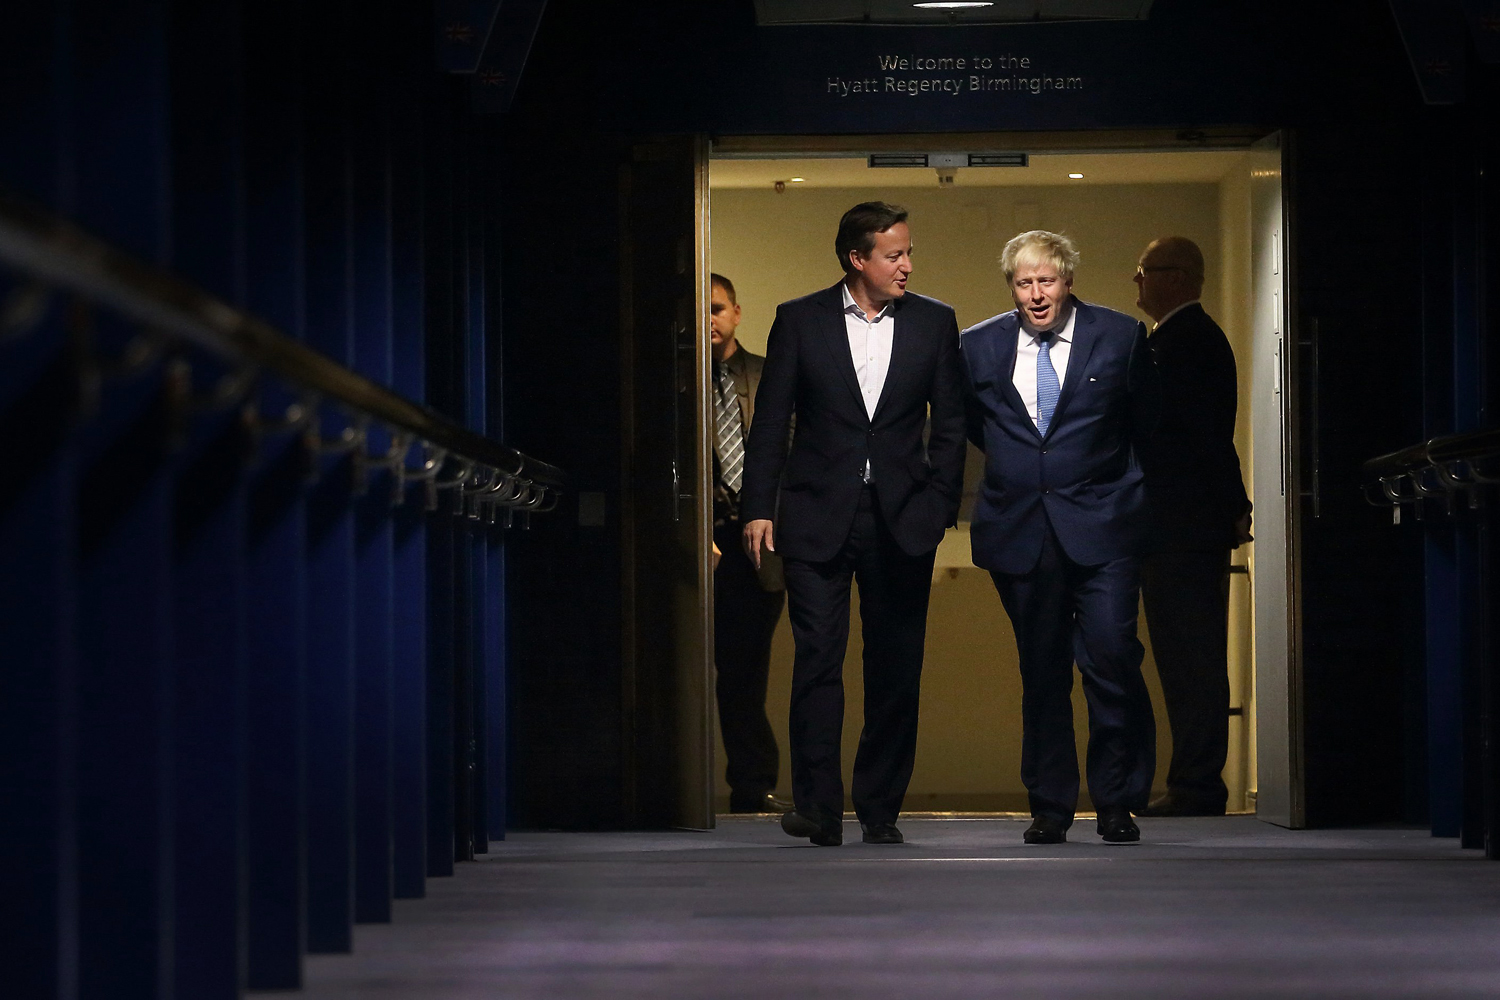 Prime Minister David Cameron walks with Mayor of London and Parliamentary candidate Boris Johnson at the Conservative party conference on Sept. 29, 2014 in Birmingham, England. (Peter Macdiarmid—Getty Images)